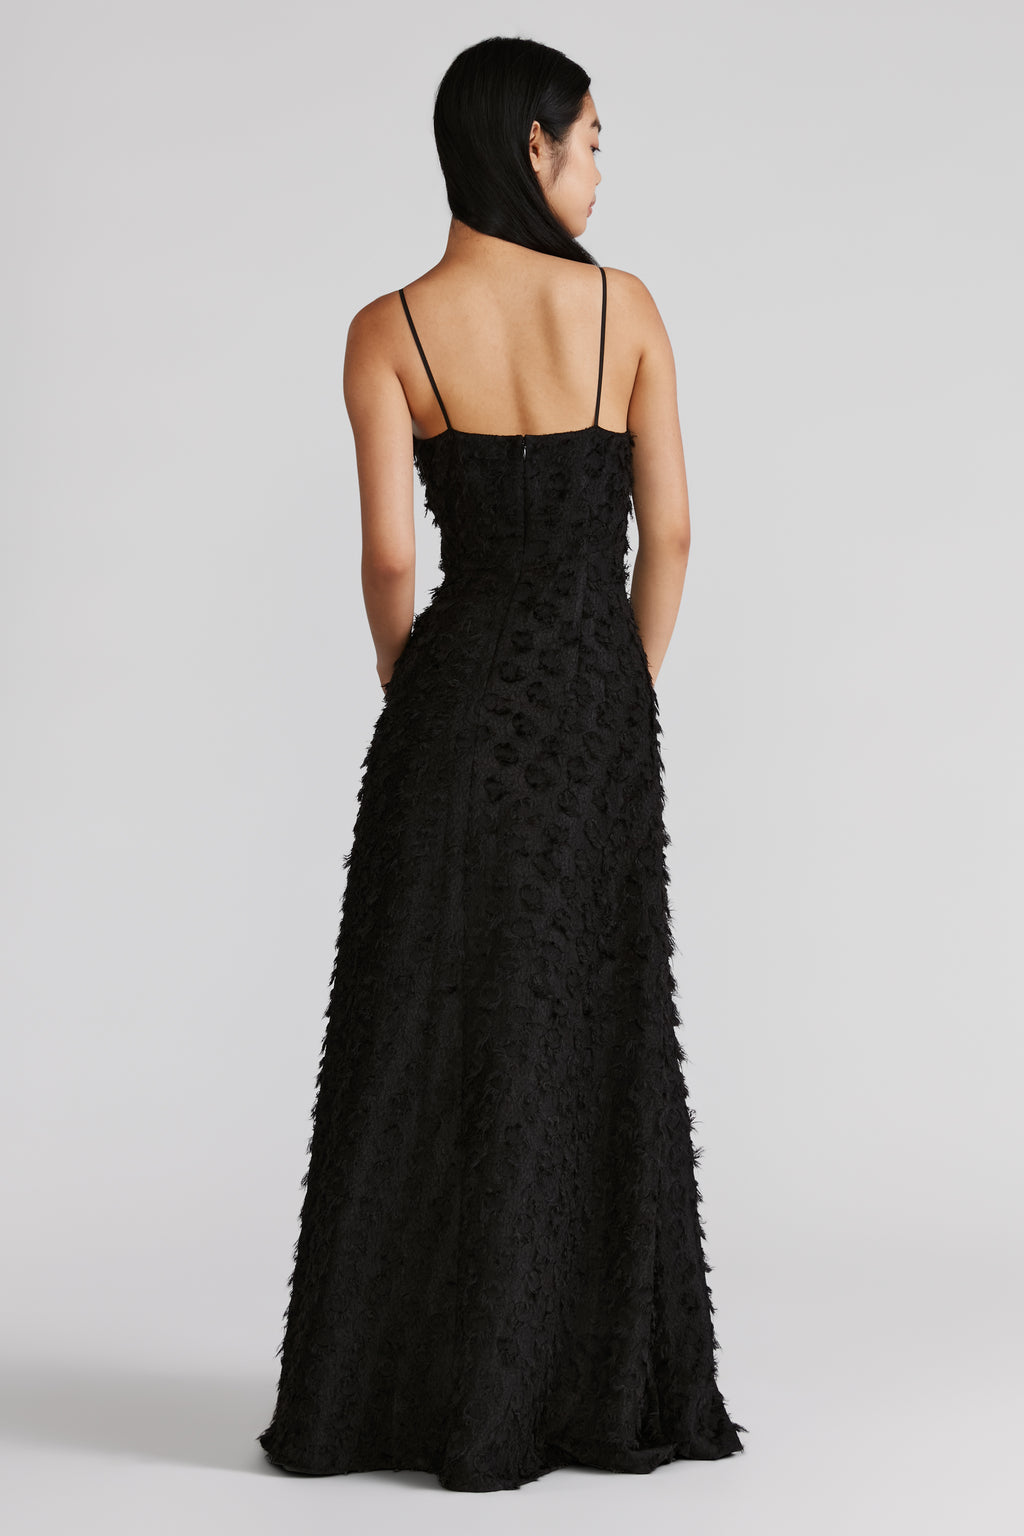 Onyx Off Soulder Gown by Zac Posen  RENTAL  The Fitzroy